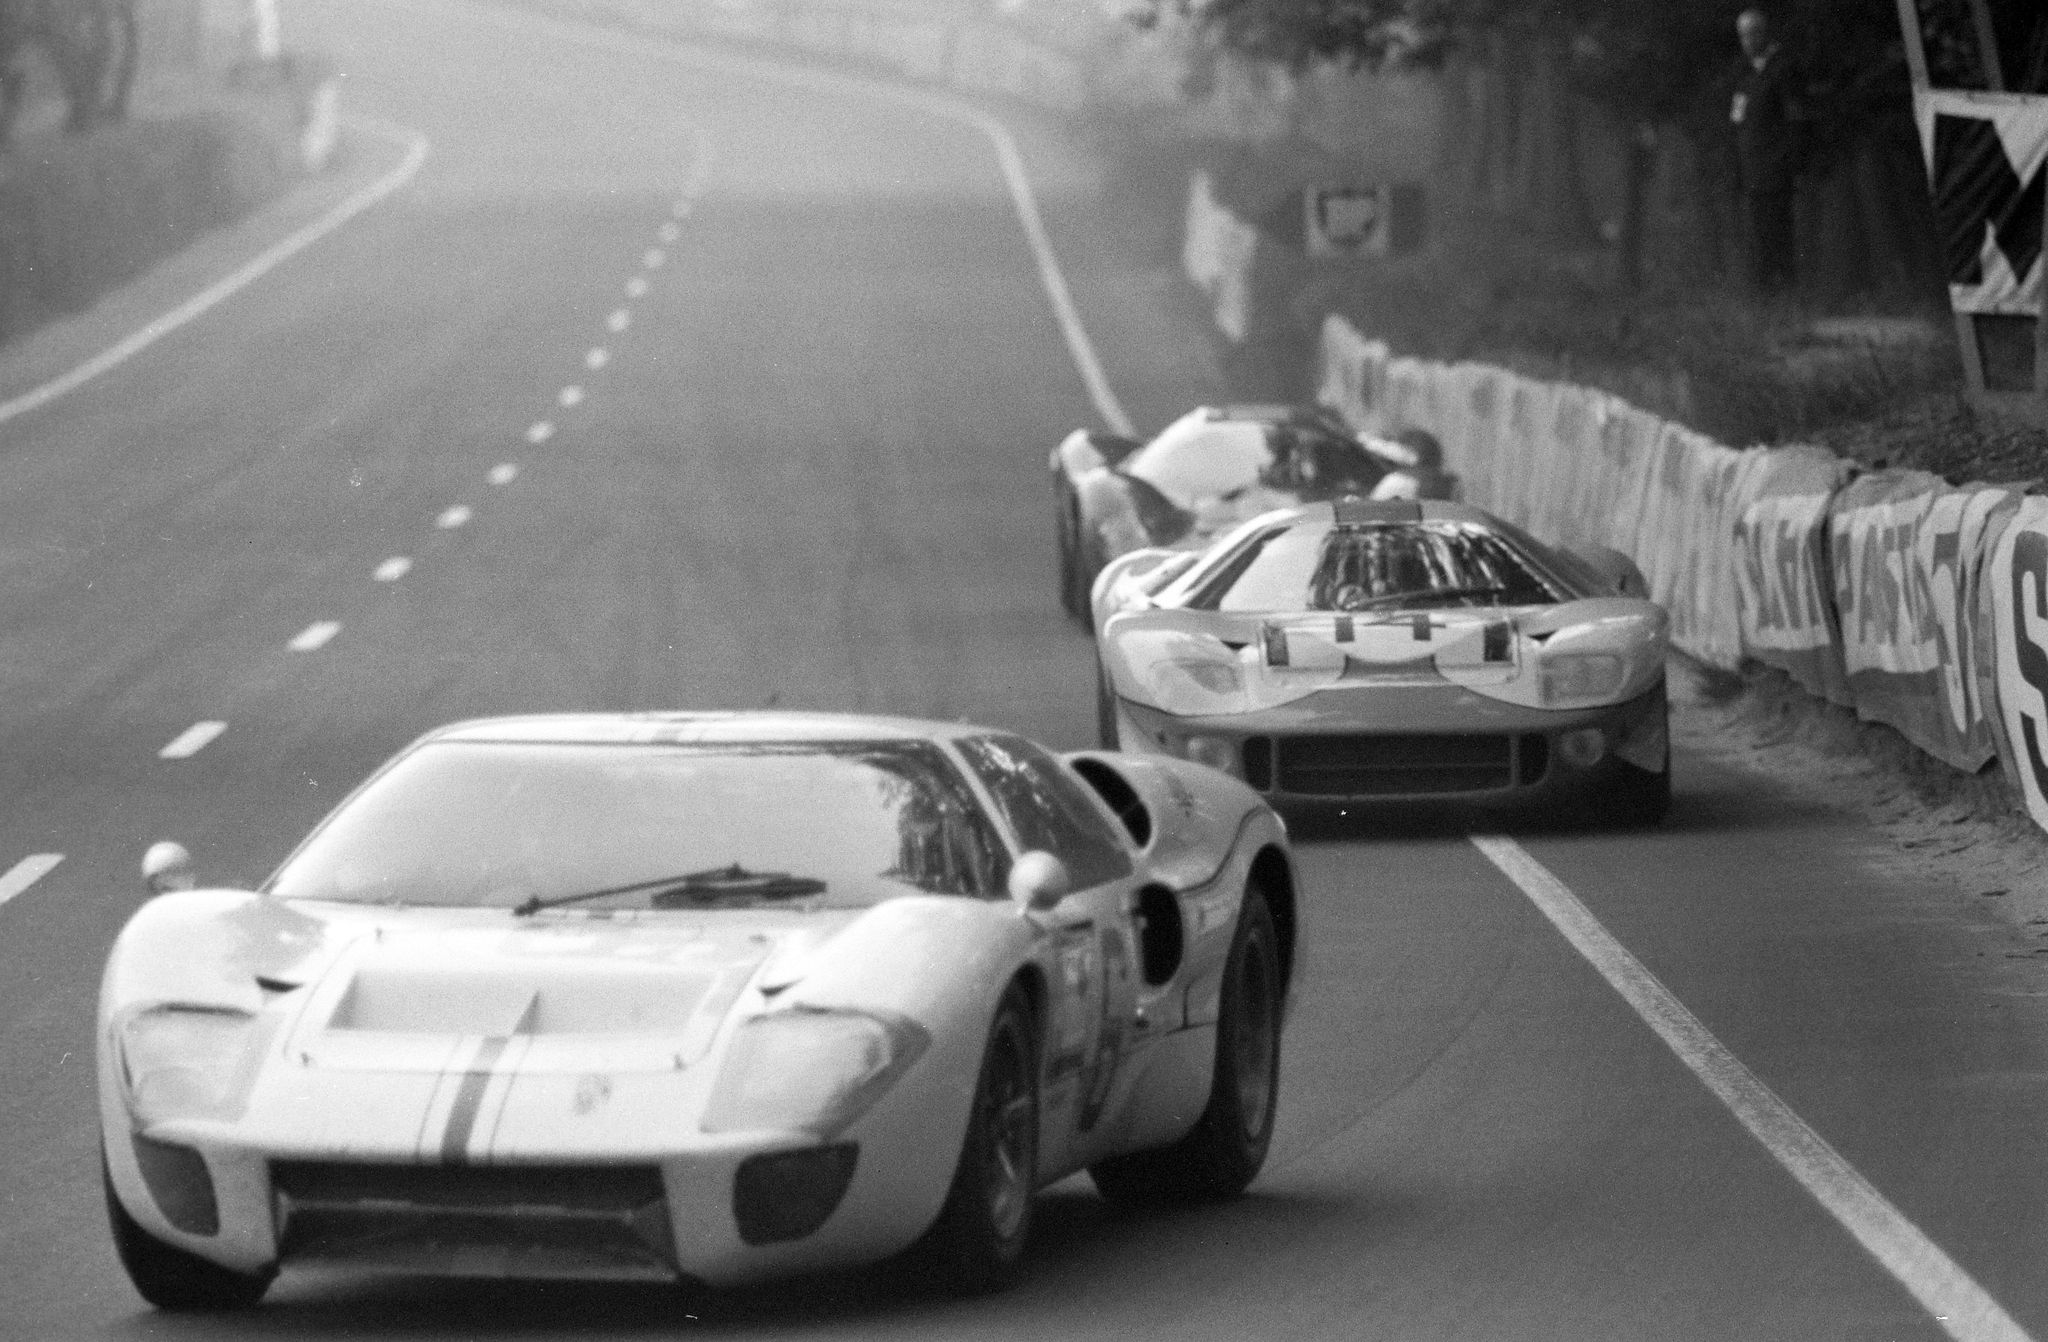 a mirage m1 at le mans ’67 tucked behind a gt40 mk ii